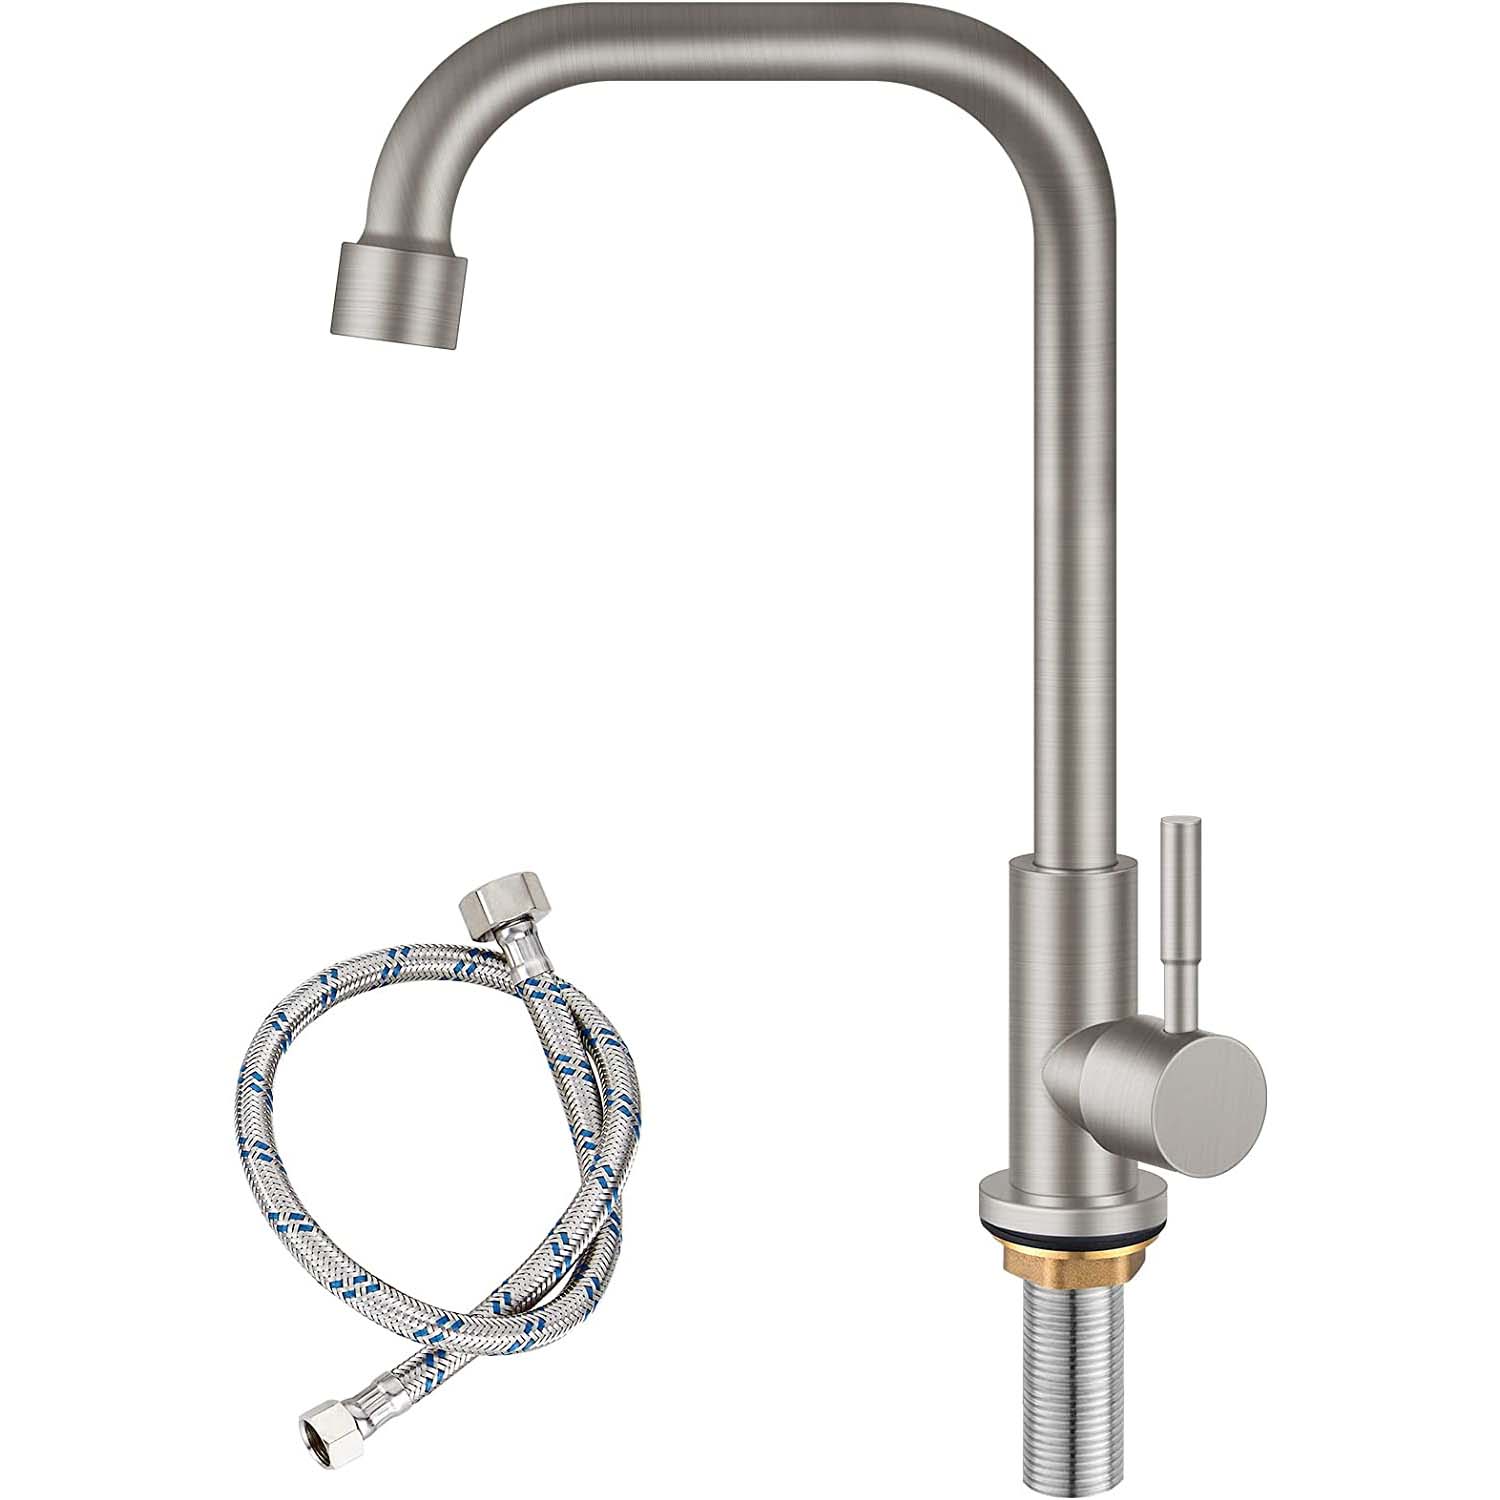 Cold Water OnlySingle Lever Handle SUS304 Sink Bar Tap 360 Degree Swivel Spout Decked Mounted Longer Thread Pipe